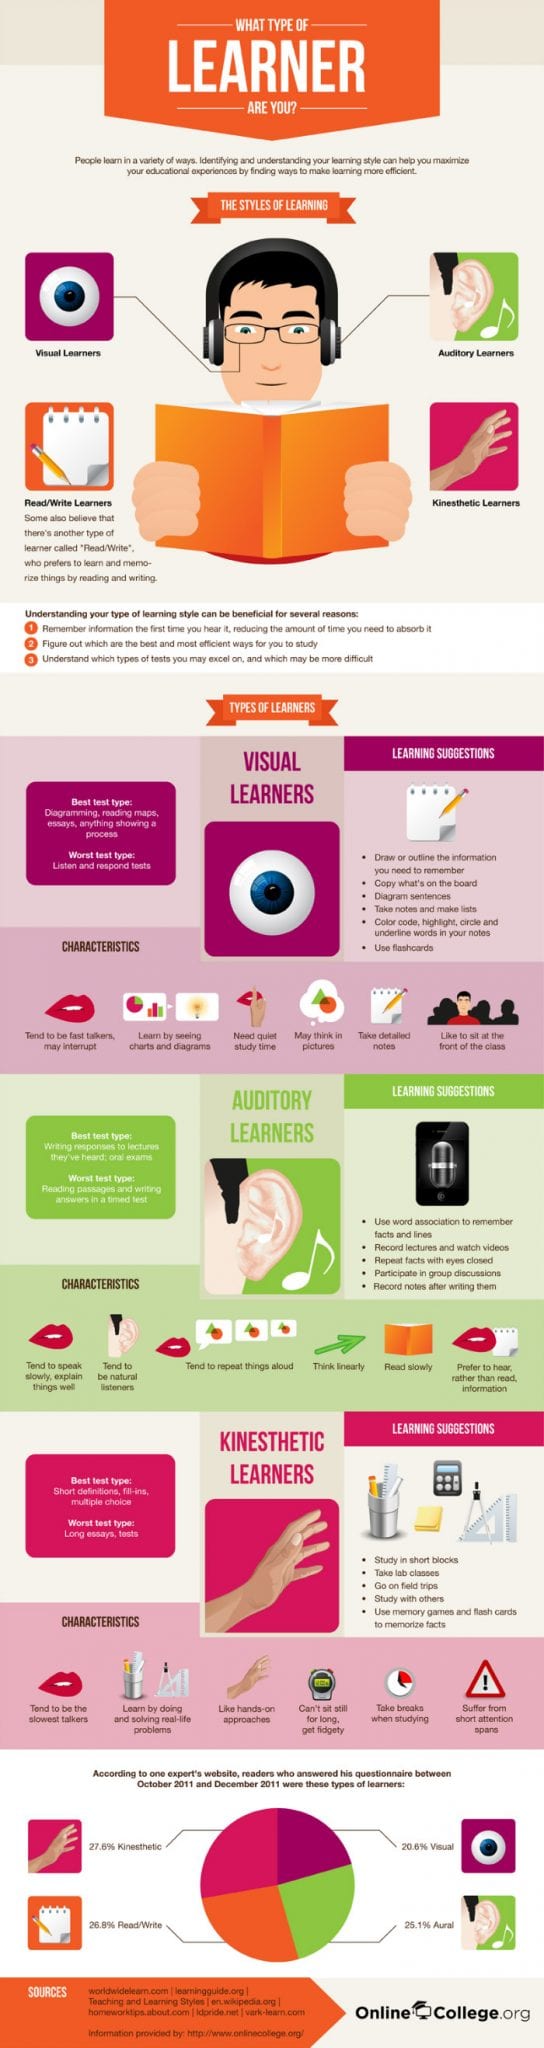 What Type of Learner Am I? [Infographic]